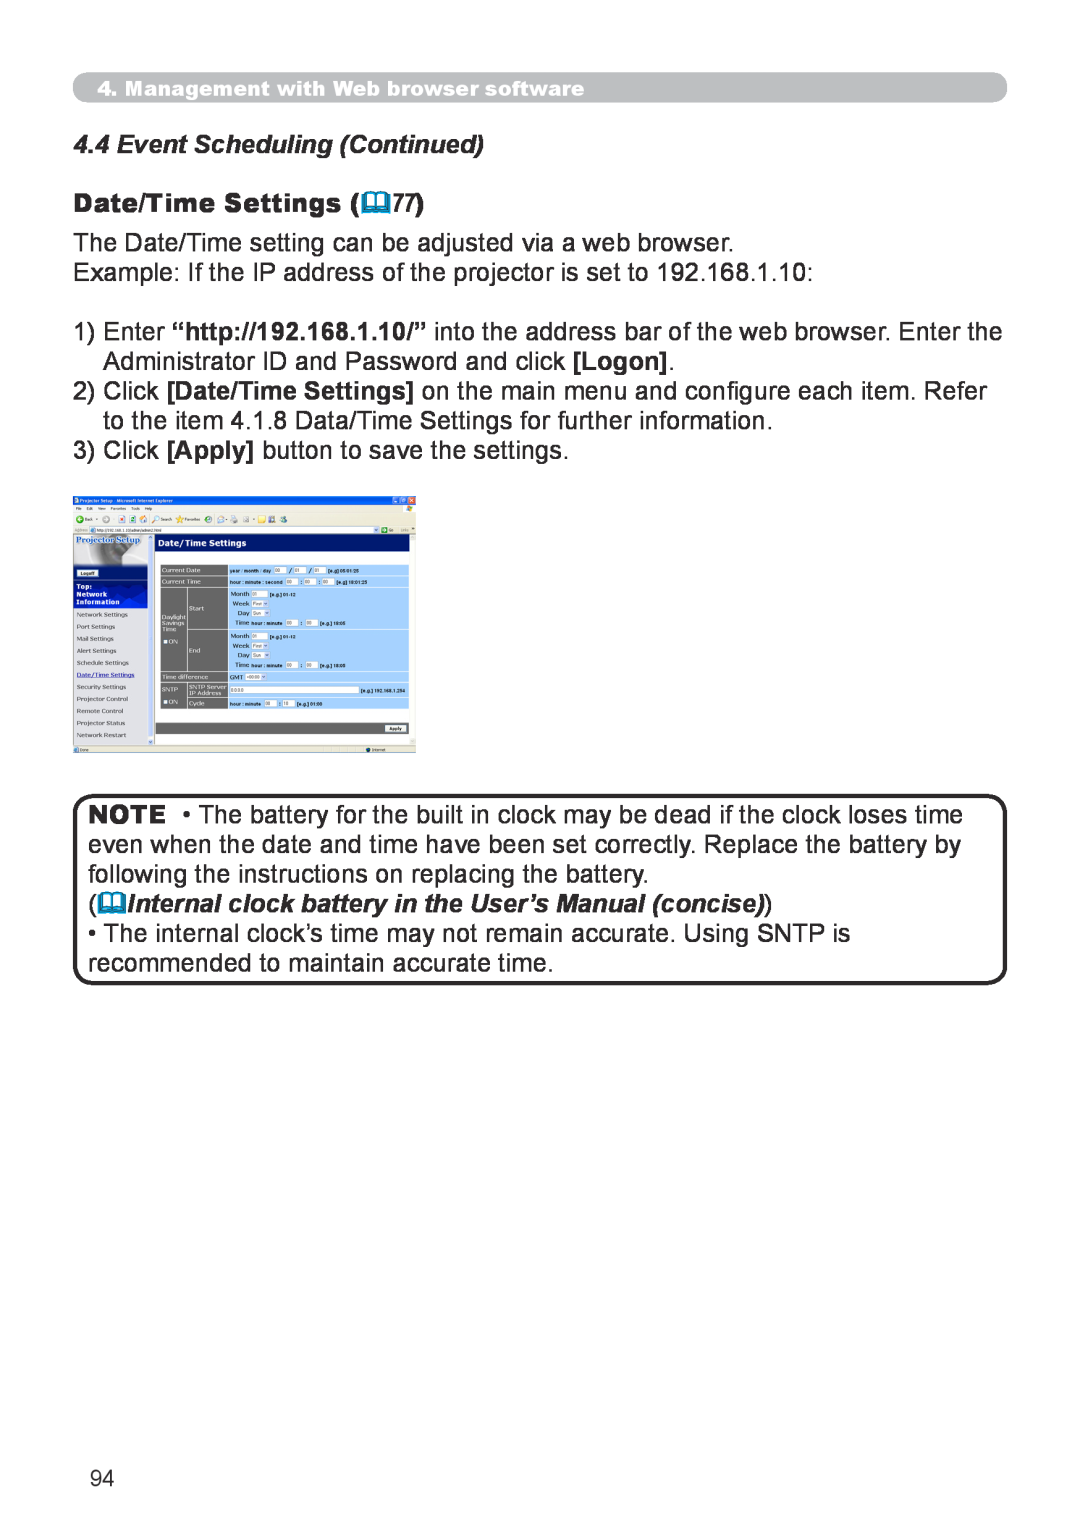 Hitachi CP-X267 user manual 4.4Event Scheduling Continued, Date/Time Settings 77 